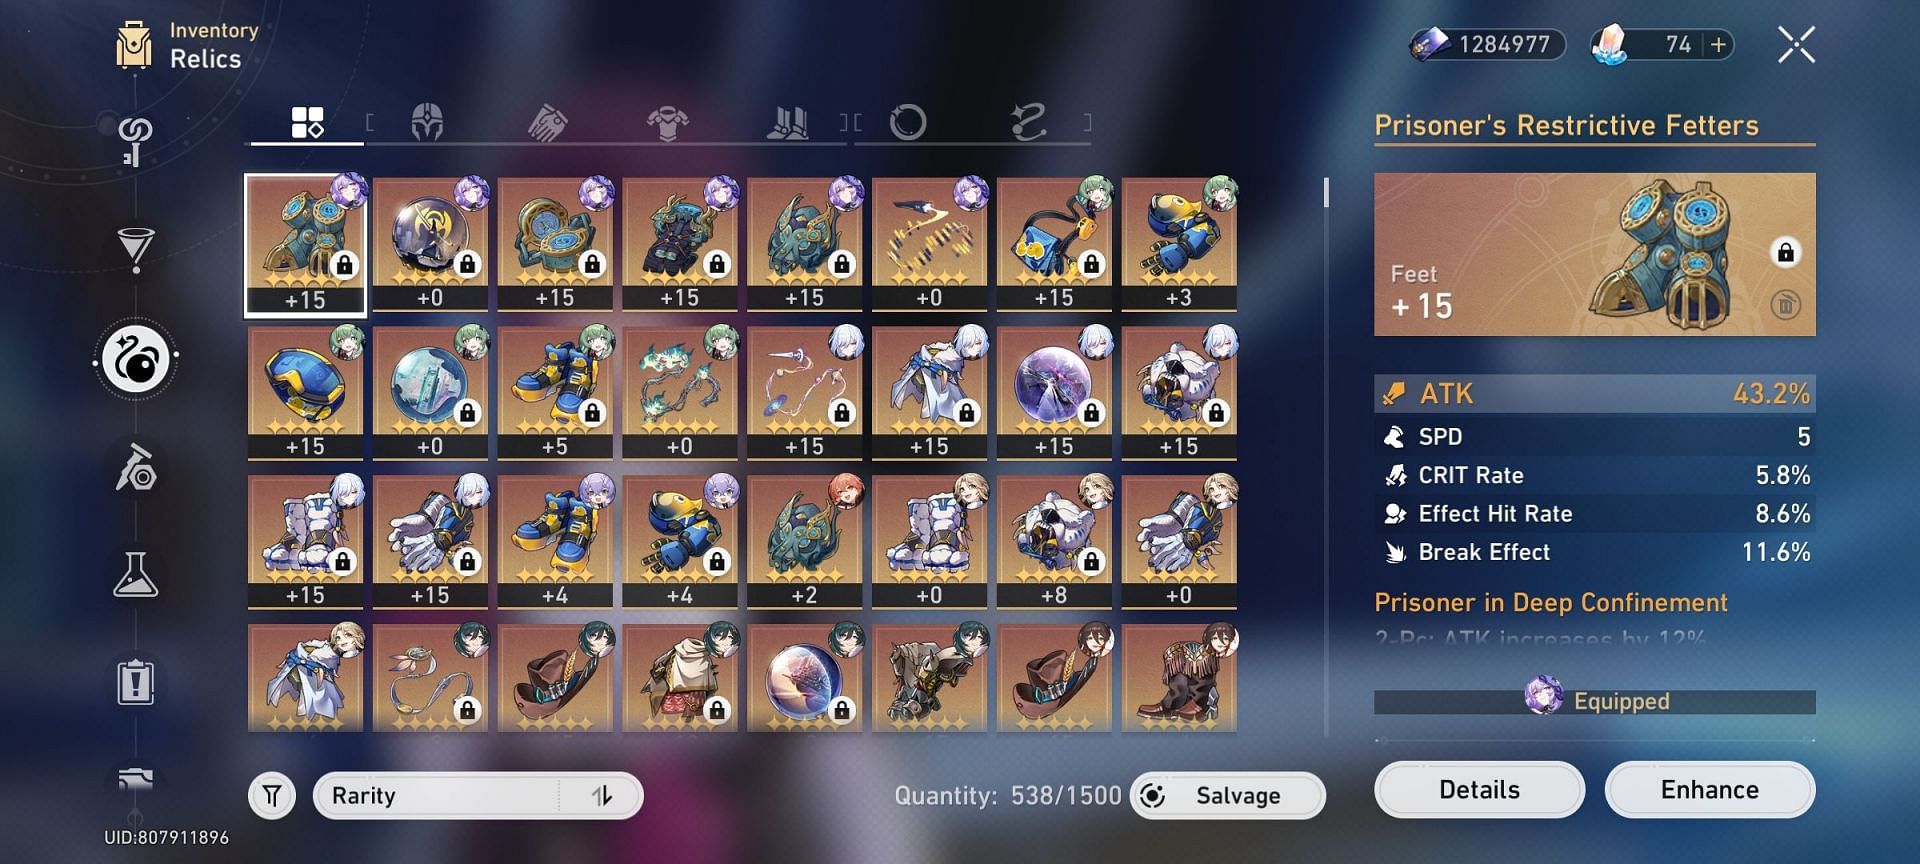 Relic Inventory is expected to get an update in Honkai Star Rai 2.1 (Image via HoYoverse)